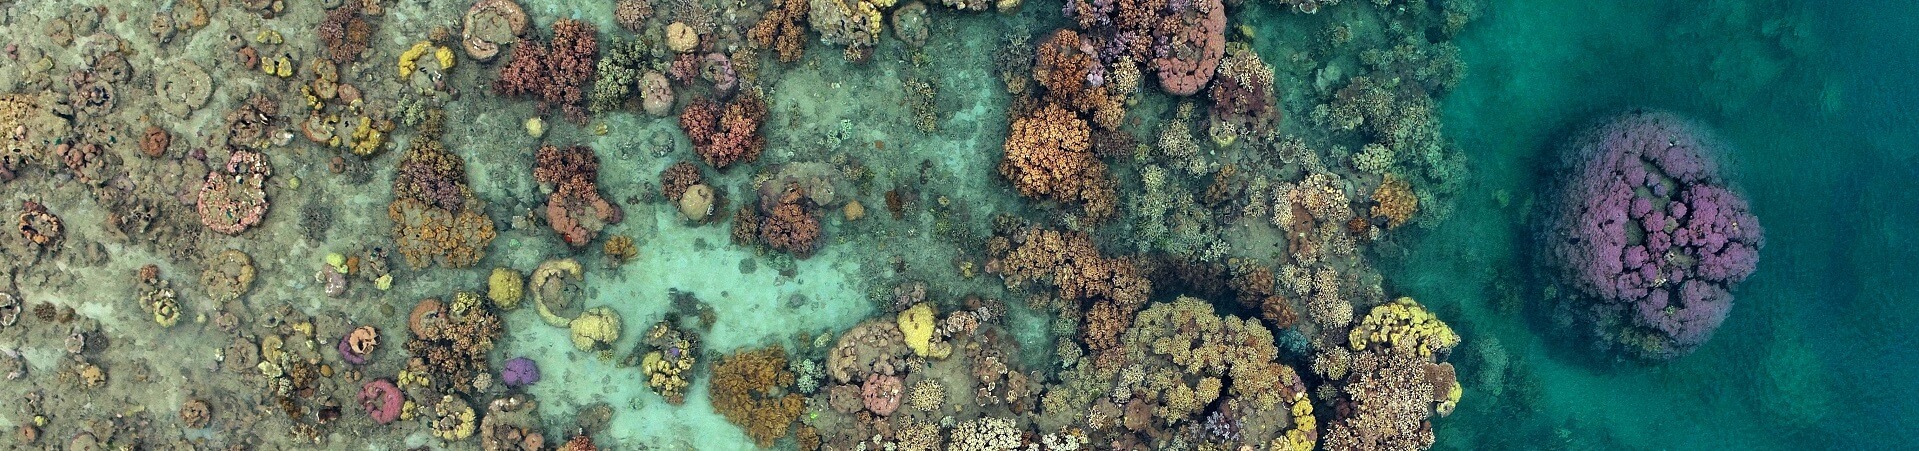 How far is the Great Barrier Reef from the coast of Australia?